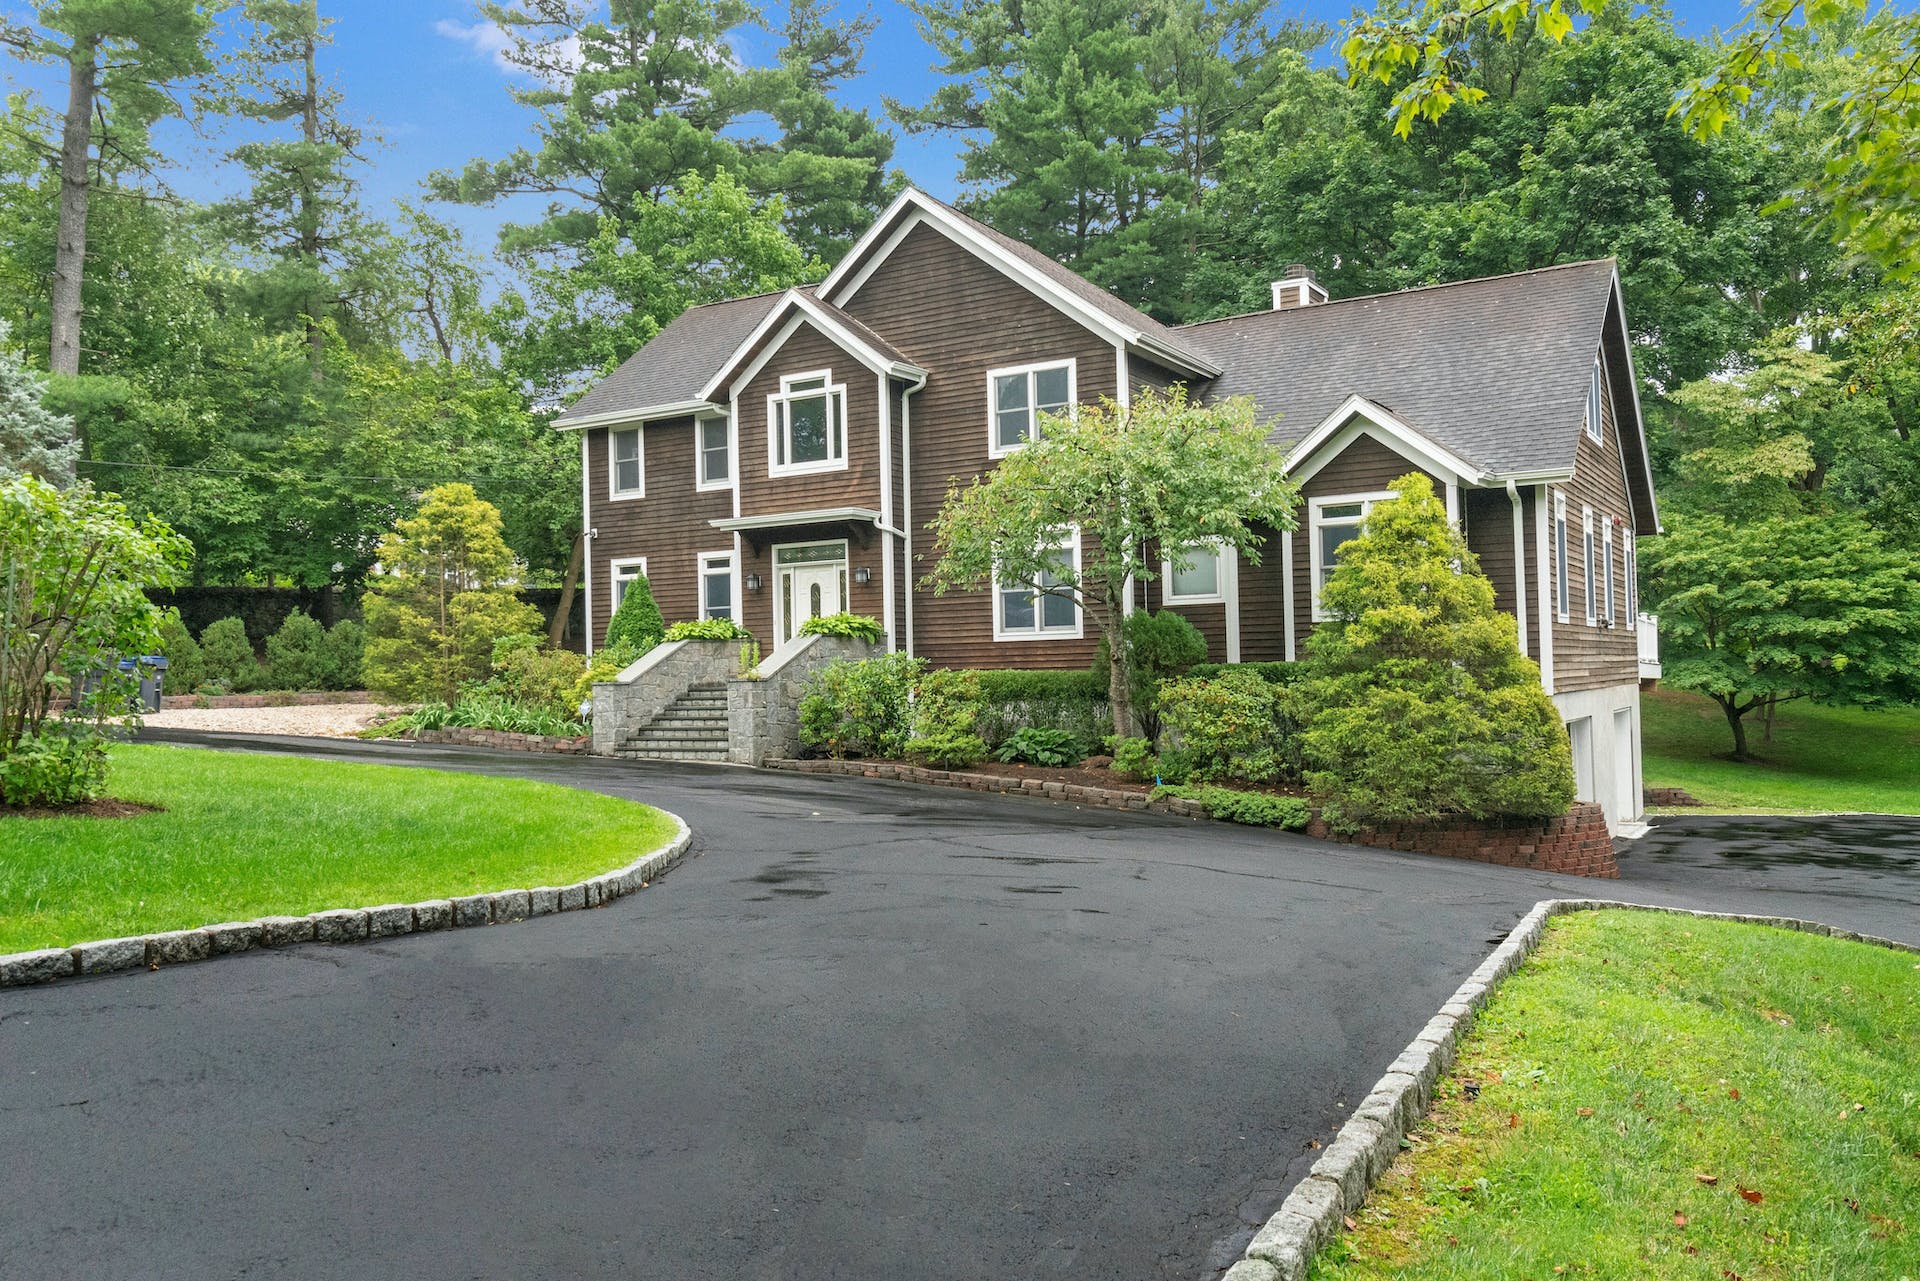 Public Open House – 2 Taylor Rd Elmsford NY 10523 – Sunday August 27th 2023 from 1:00 PM to 3:00 PM